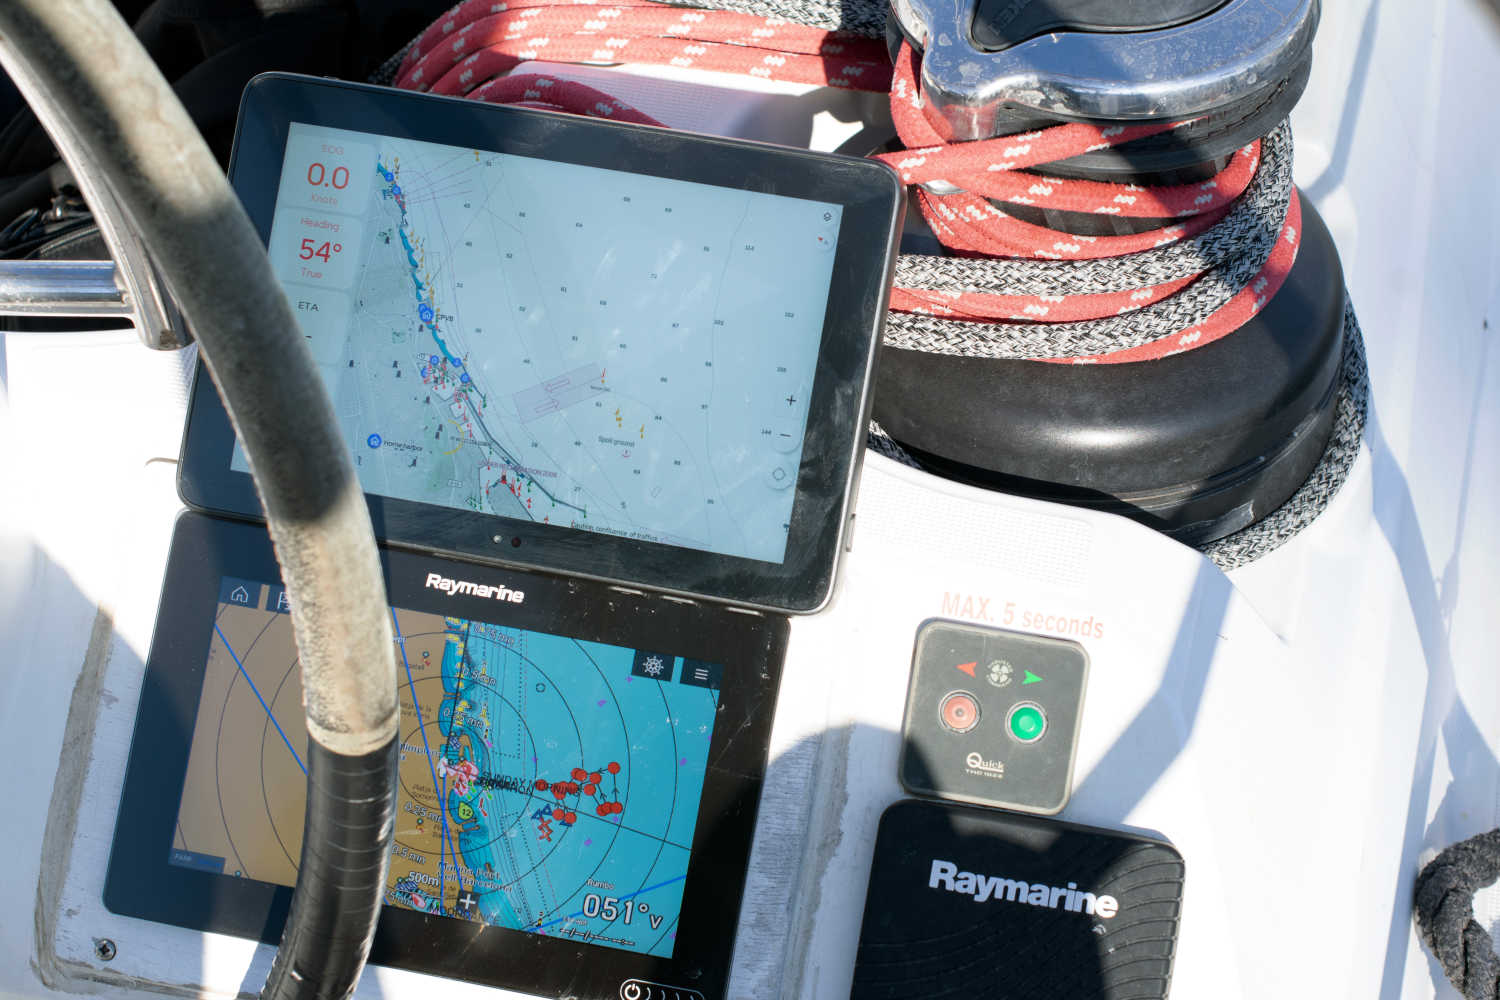 Orca Display 2 (top) and a Raymarine Axiom 2021 (bottom) at full brightness under direct sunlight in the Mediterranean.